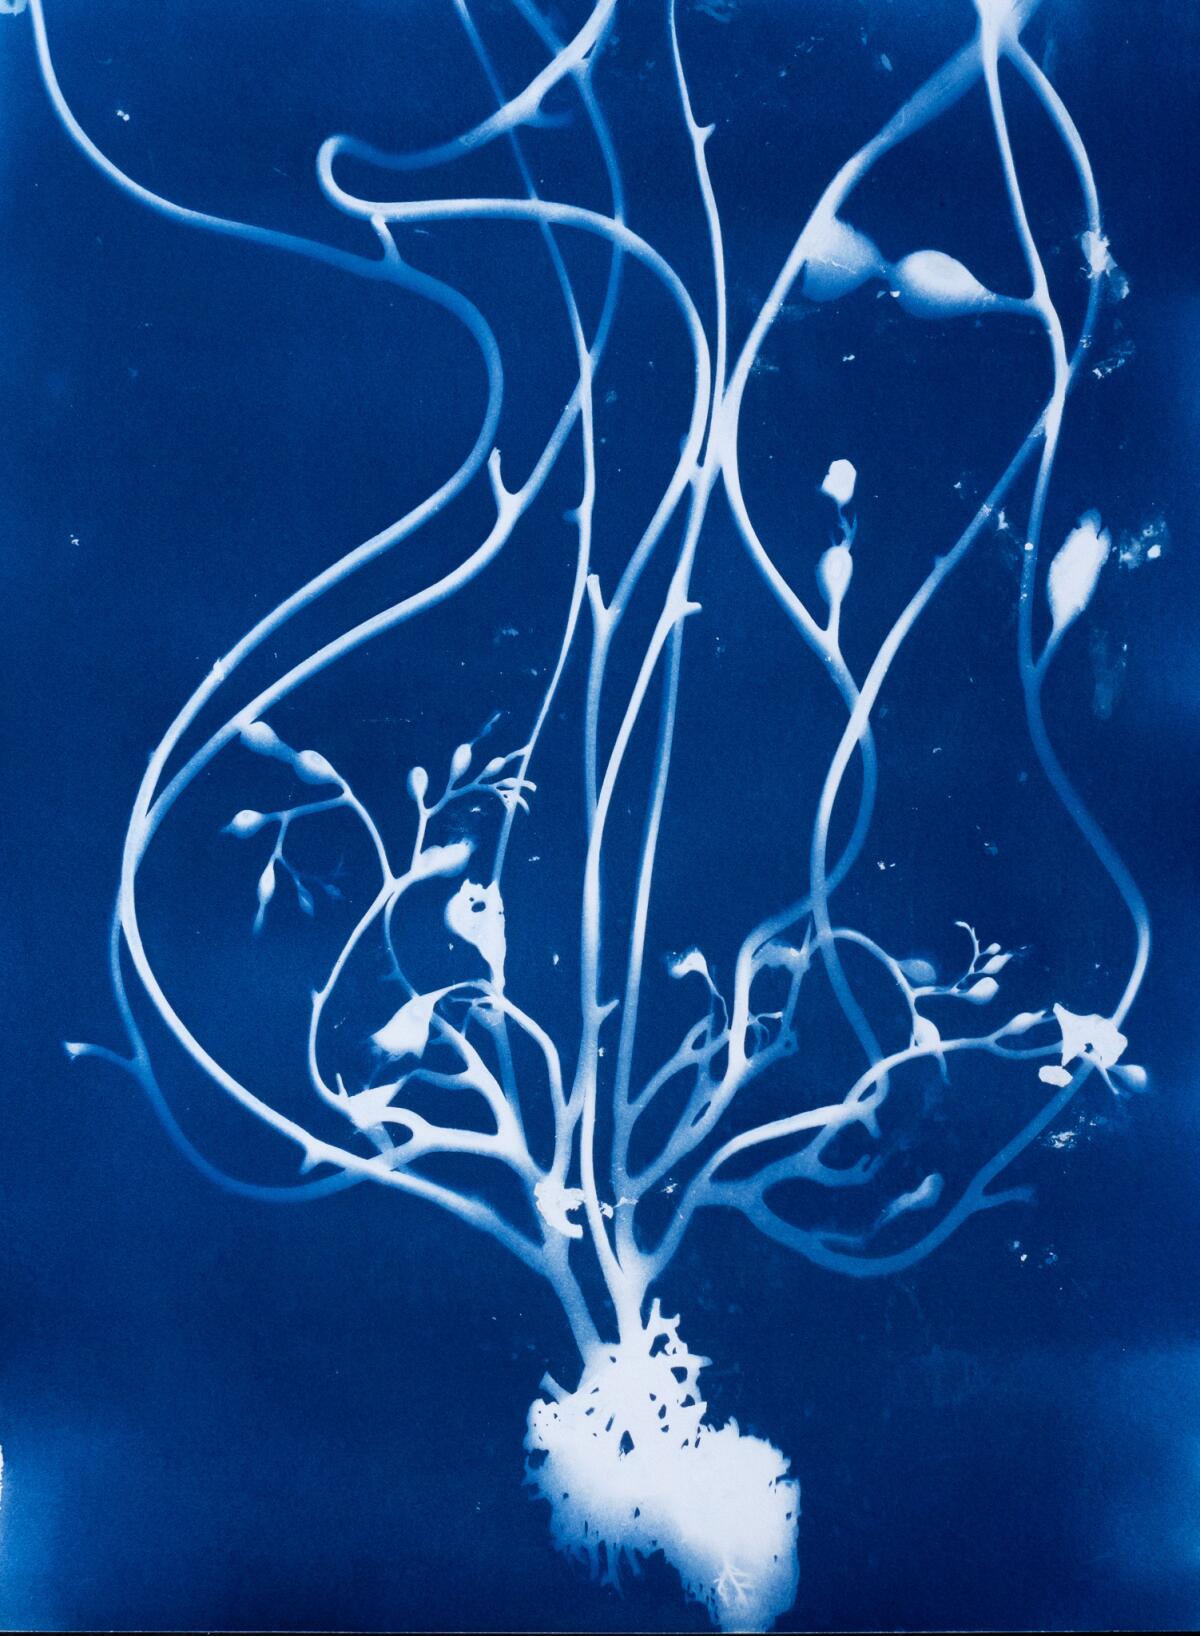 Friends of the La Jolla Library present “Ode to the Blue Forest” features cyanotypes by La Jollan Oriana Poindexter.